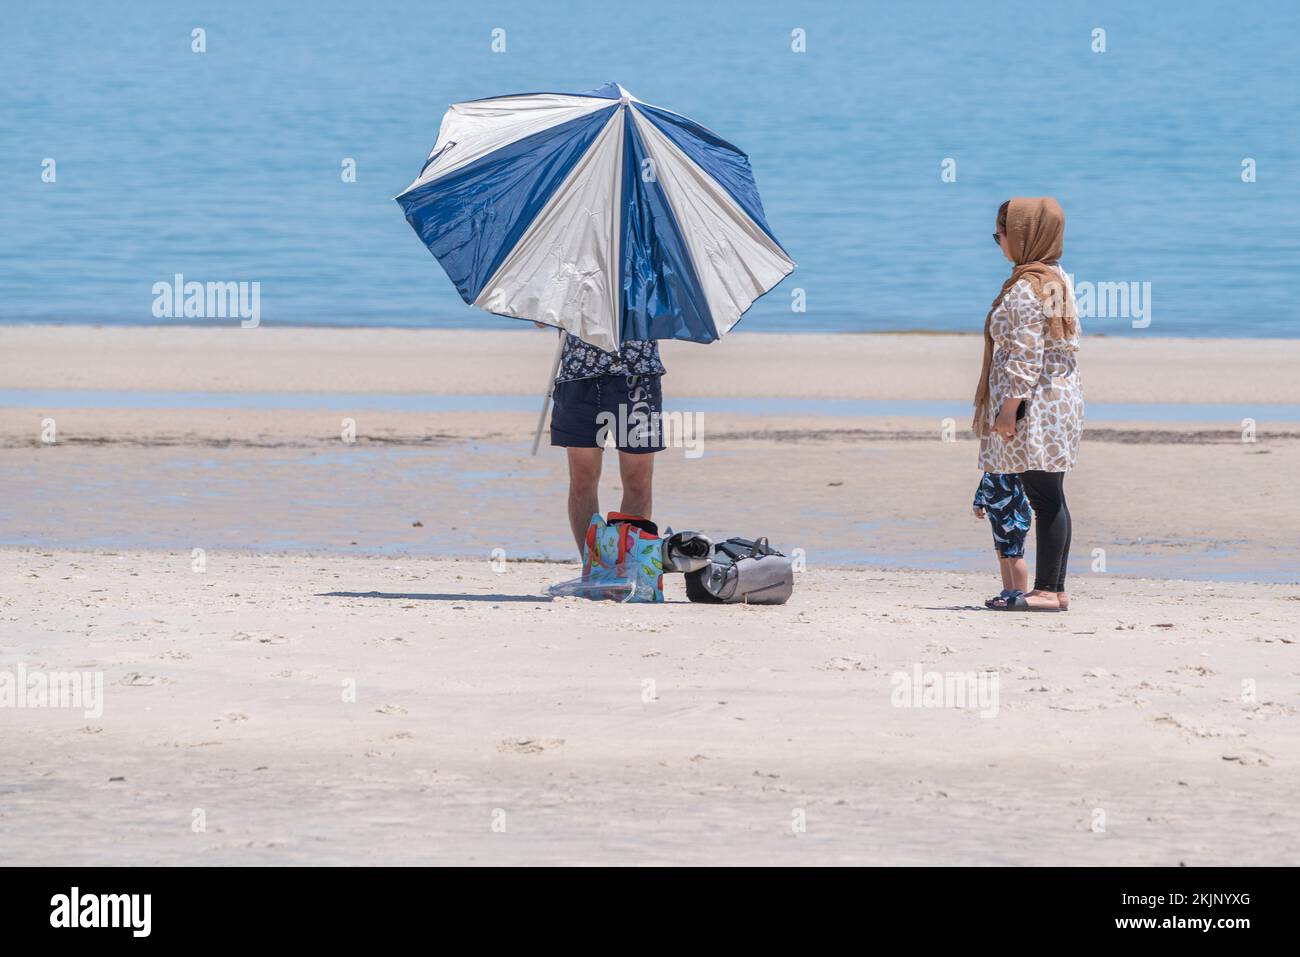 Adelaide, Australia. 25 November 2022.  A man adjusts a sun parasol today during the  the hot weather at the beach in Adelaide Australia as temperatures are forecast to reach above 30celsius. Credit: amer ghazzal/Alamy Live News Stock Photo